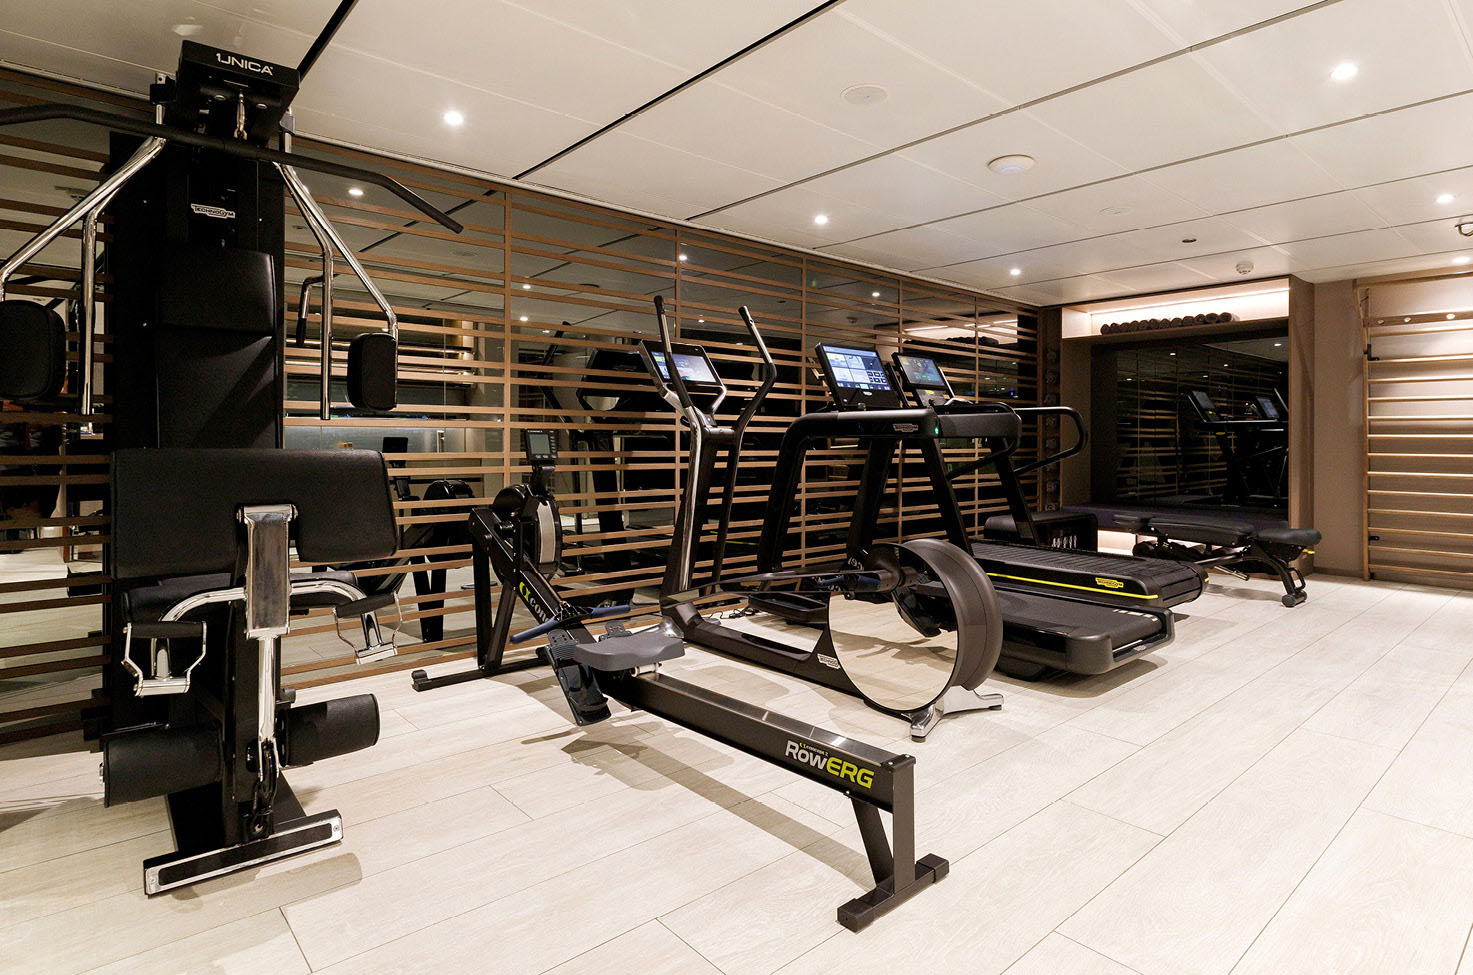 A bright and spacious gym with equipment such a rowing machines, weight machines, and treadmills